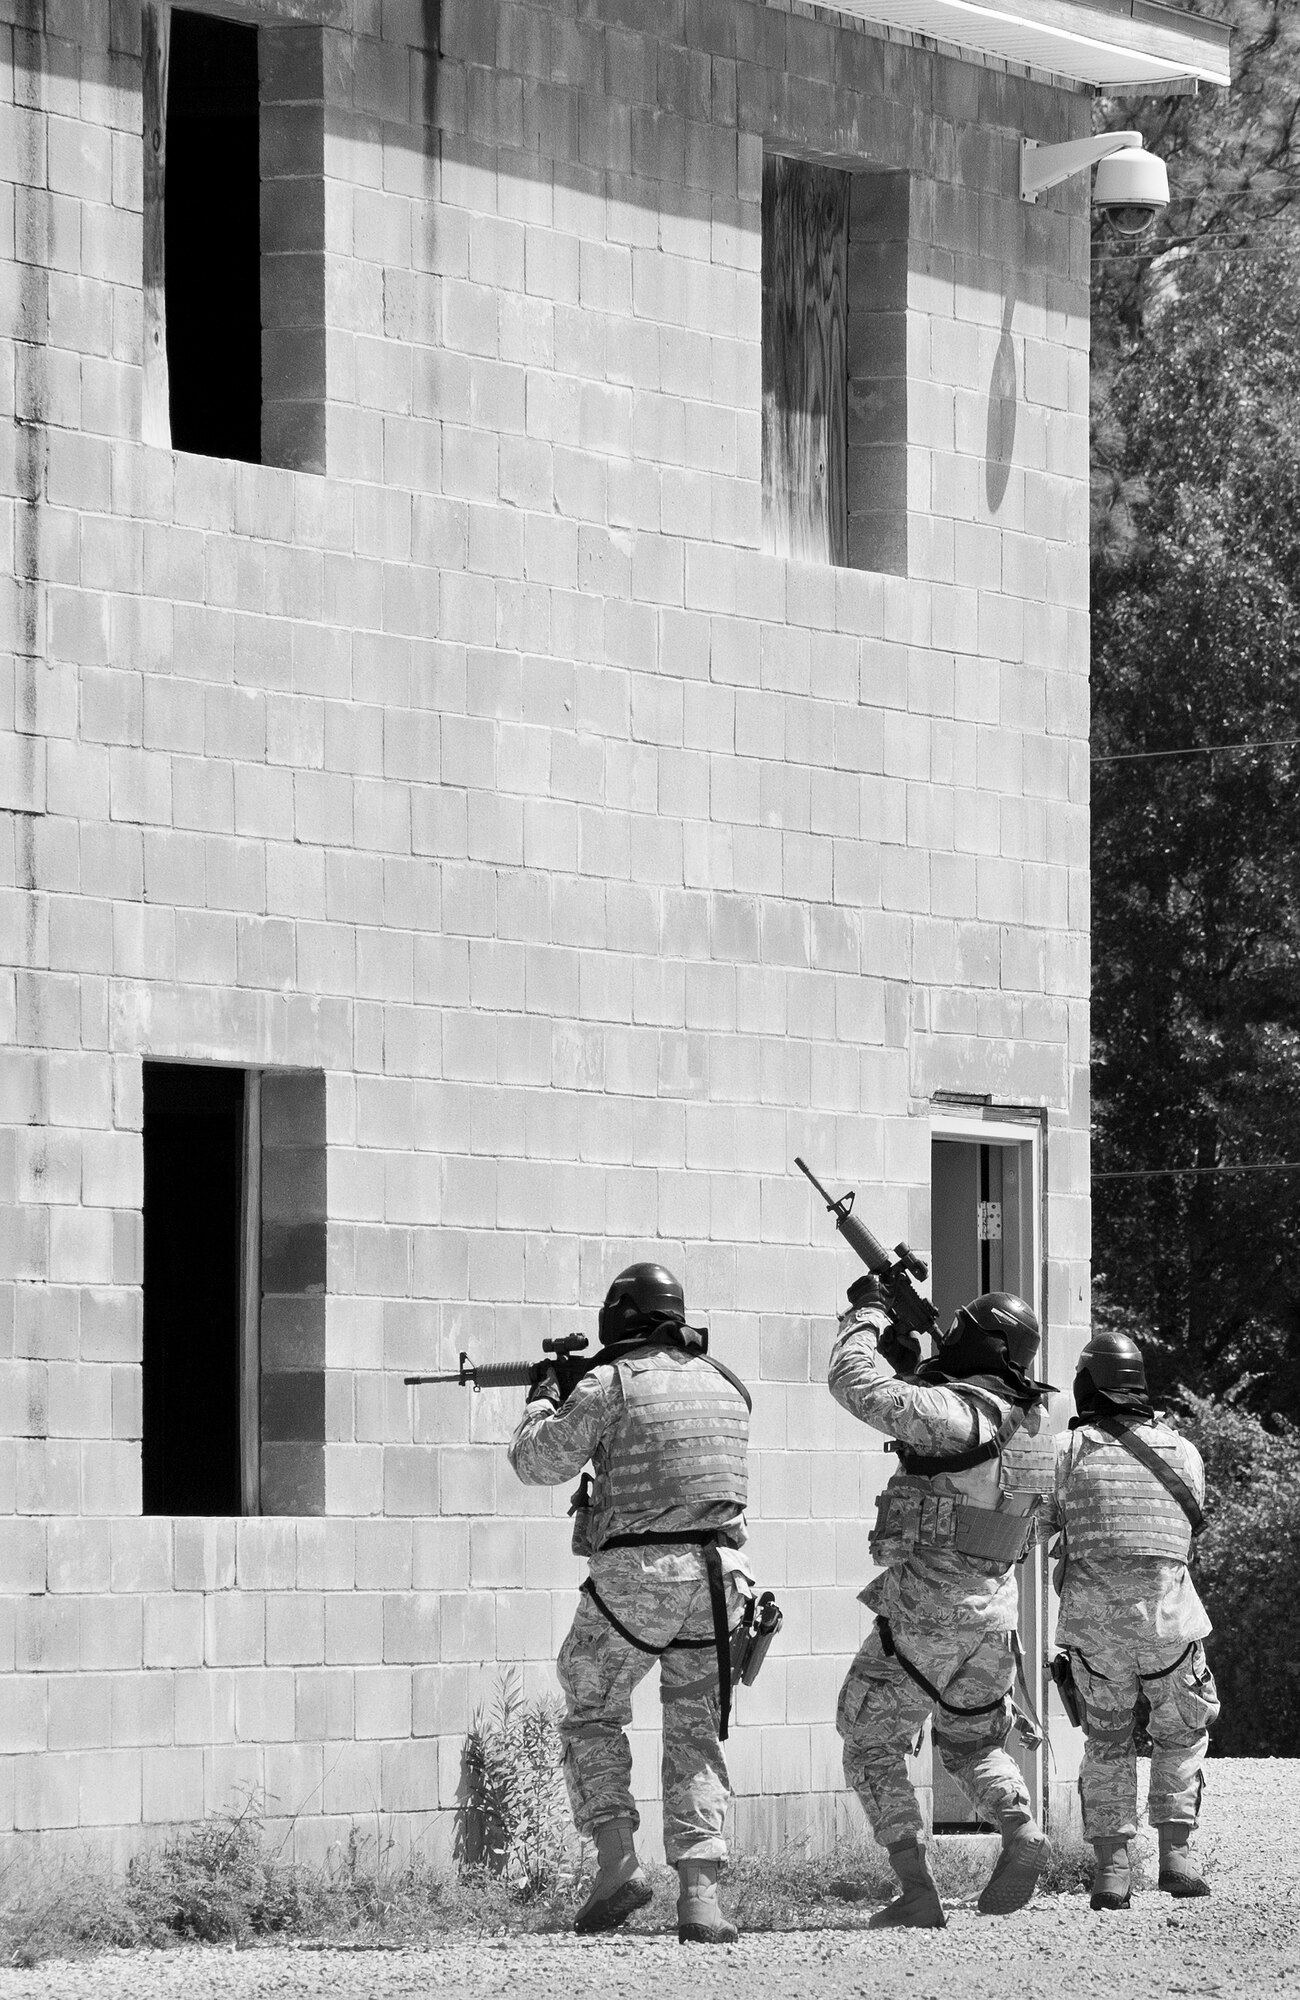 A team of 96th Security Forces Squadron Airmen advance into a building entrance during a shoot, move and communicate drill in June at Eglin Air Force Base, Fla.  The mandatory training requirement is in addition to annual weapons qualification training.  The exercise consists of Airmen firing simmunition ammo while advancing toward, away from and to the side of a target.  This is followed by a building sweep and clear drill.  Eglin’s security forces personnel protect and defend the main base, facilities, gates, Duke Field, 7th SFG compound and land and water ranges.  (U.S. Air Force photo/Tech. Sgt. Sam King)